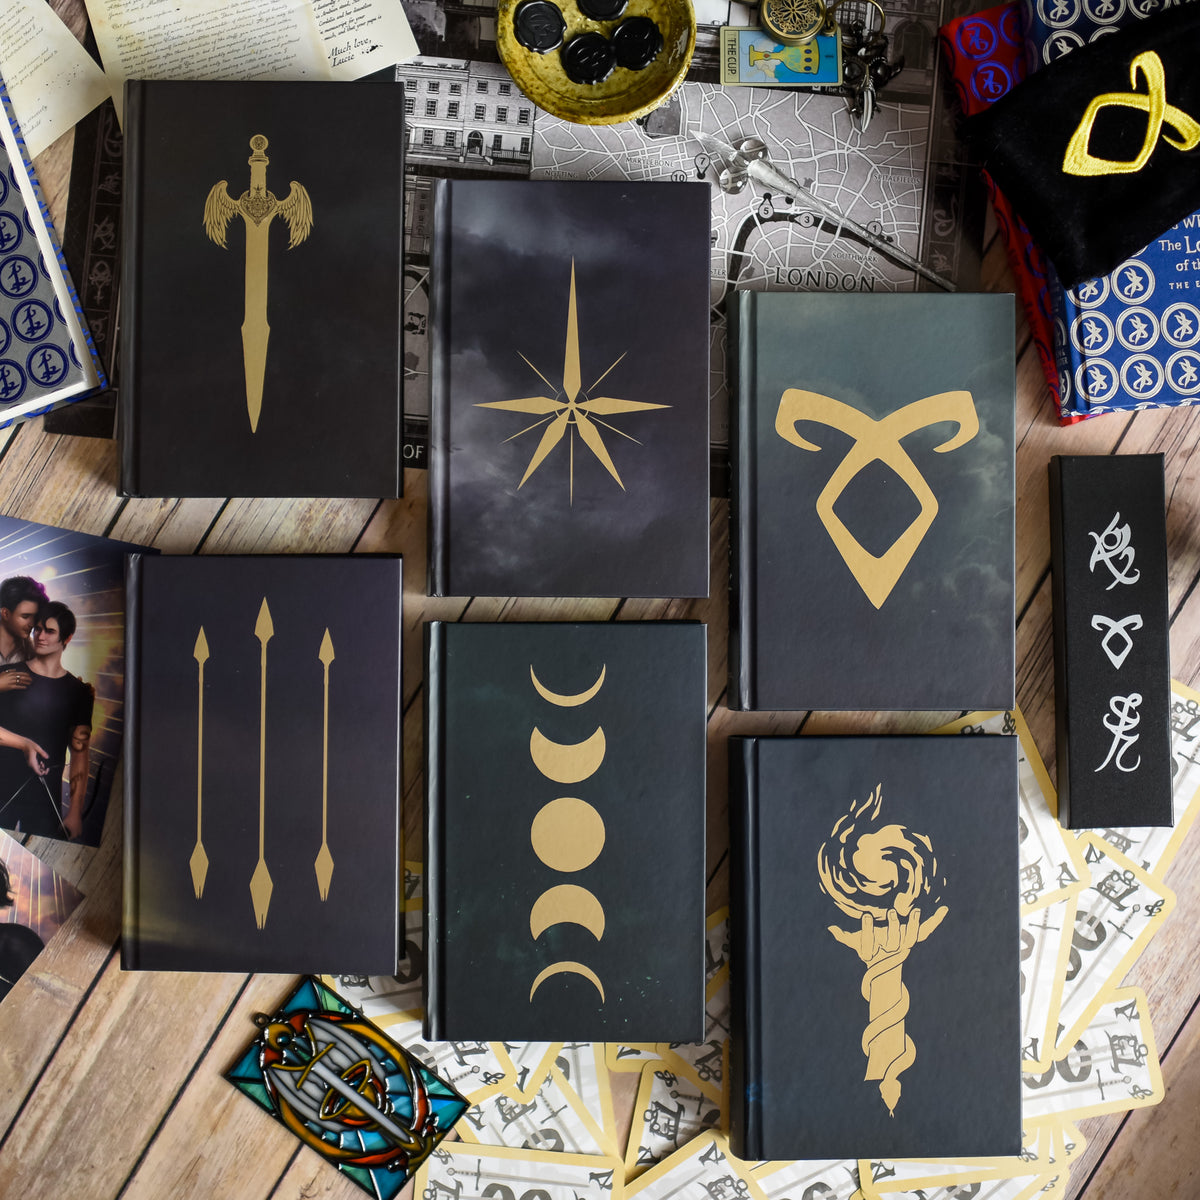 Special Edition The Mortal Instruments Box Set featuring all six books in the series with gold Shadowhunter runes on covers